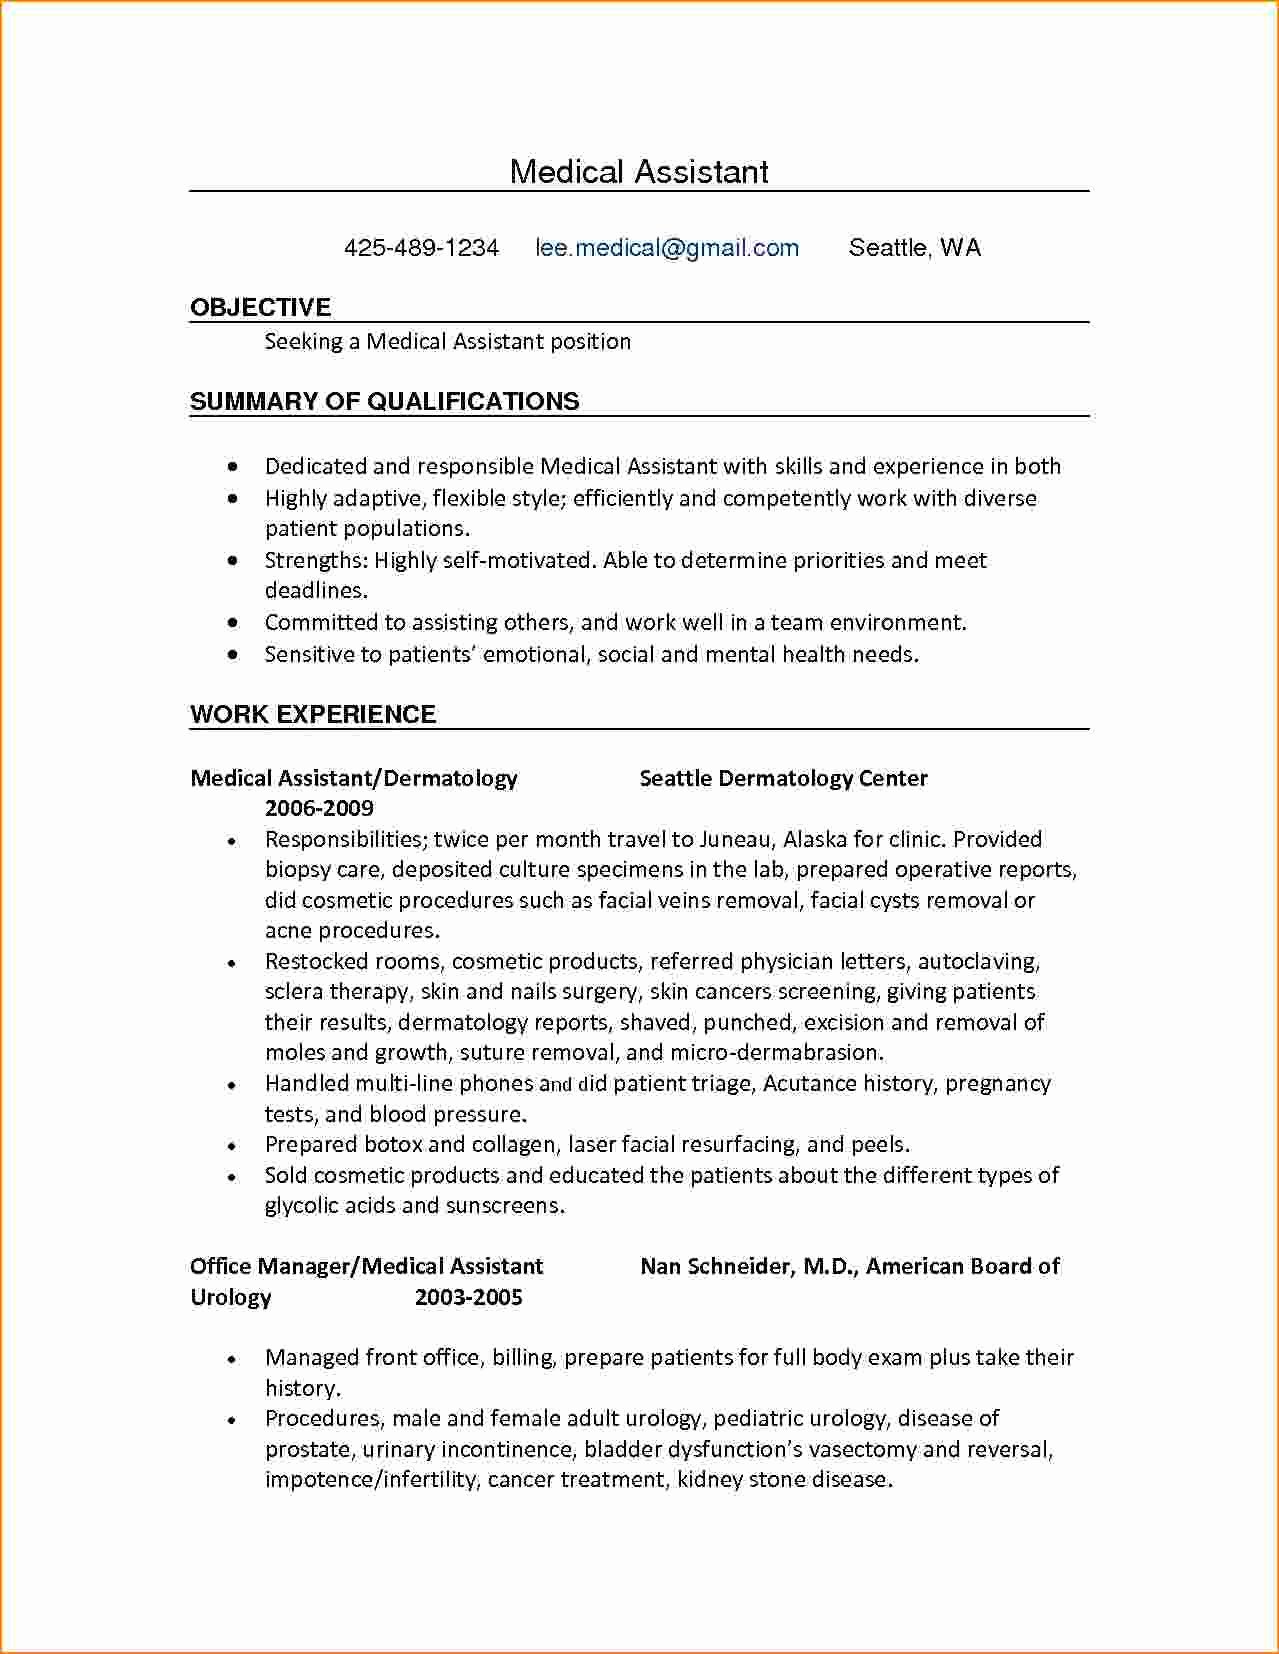 Medical assistant Job Duties for Resume Resume Ideas